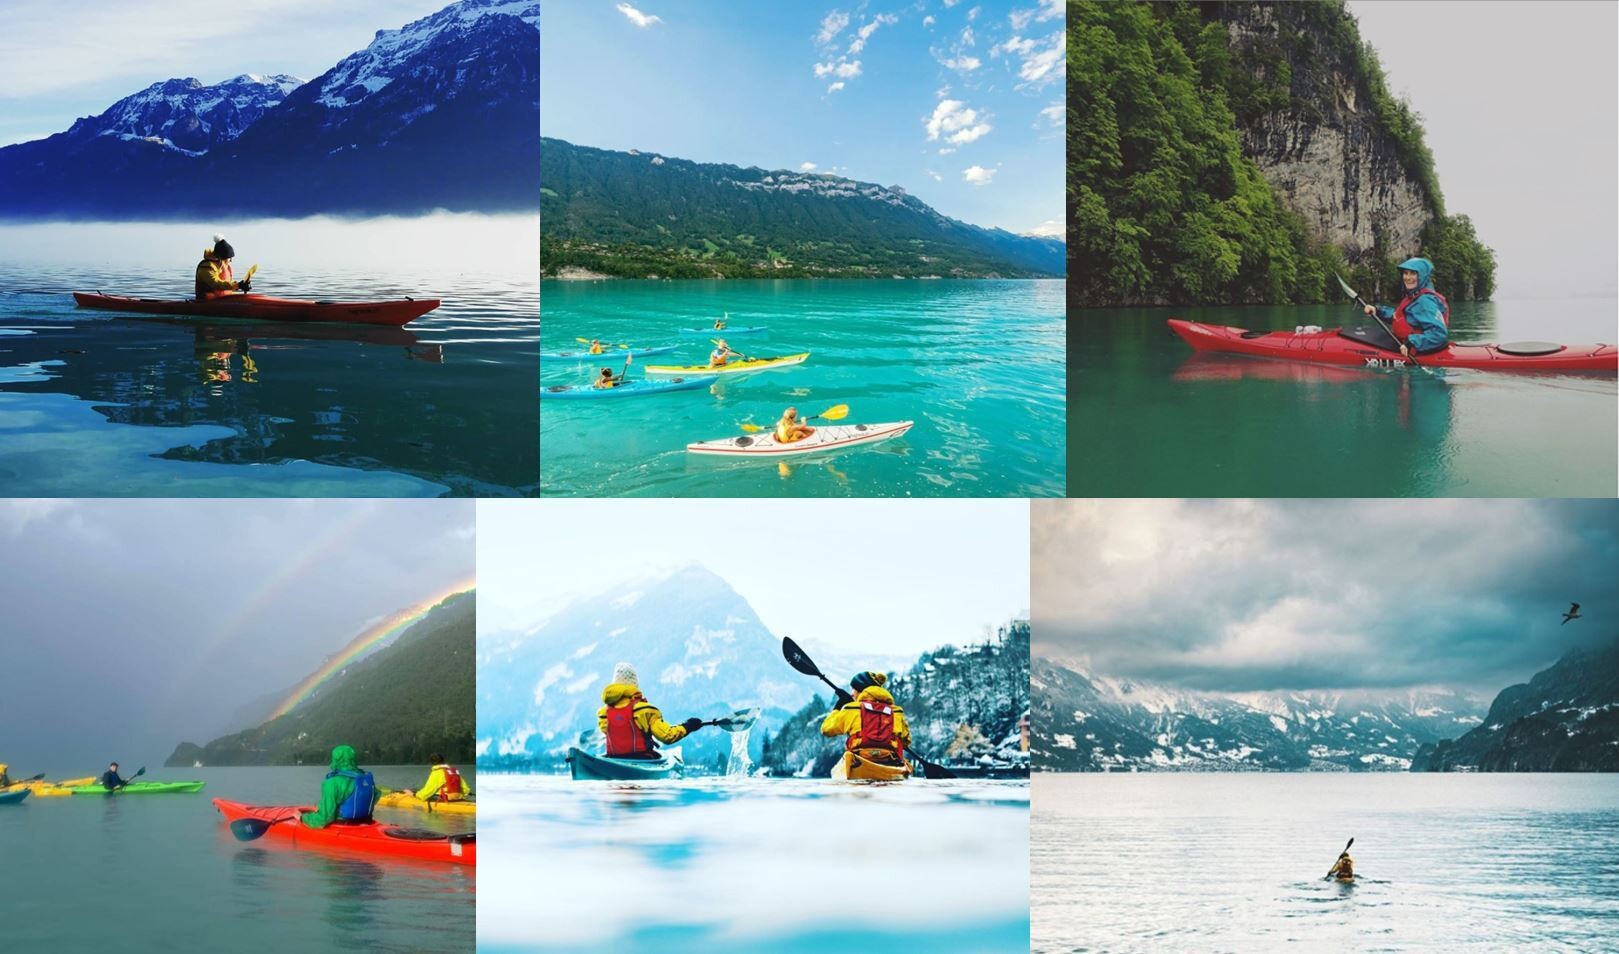 Photo collage of people kayaking on Lake Brienz in various weather conditions